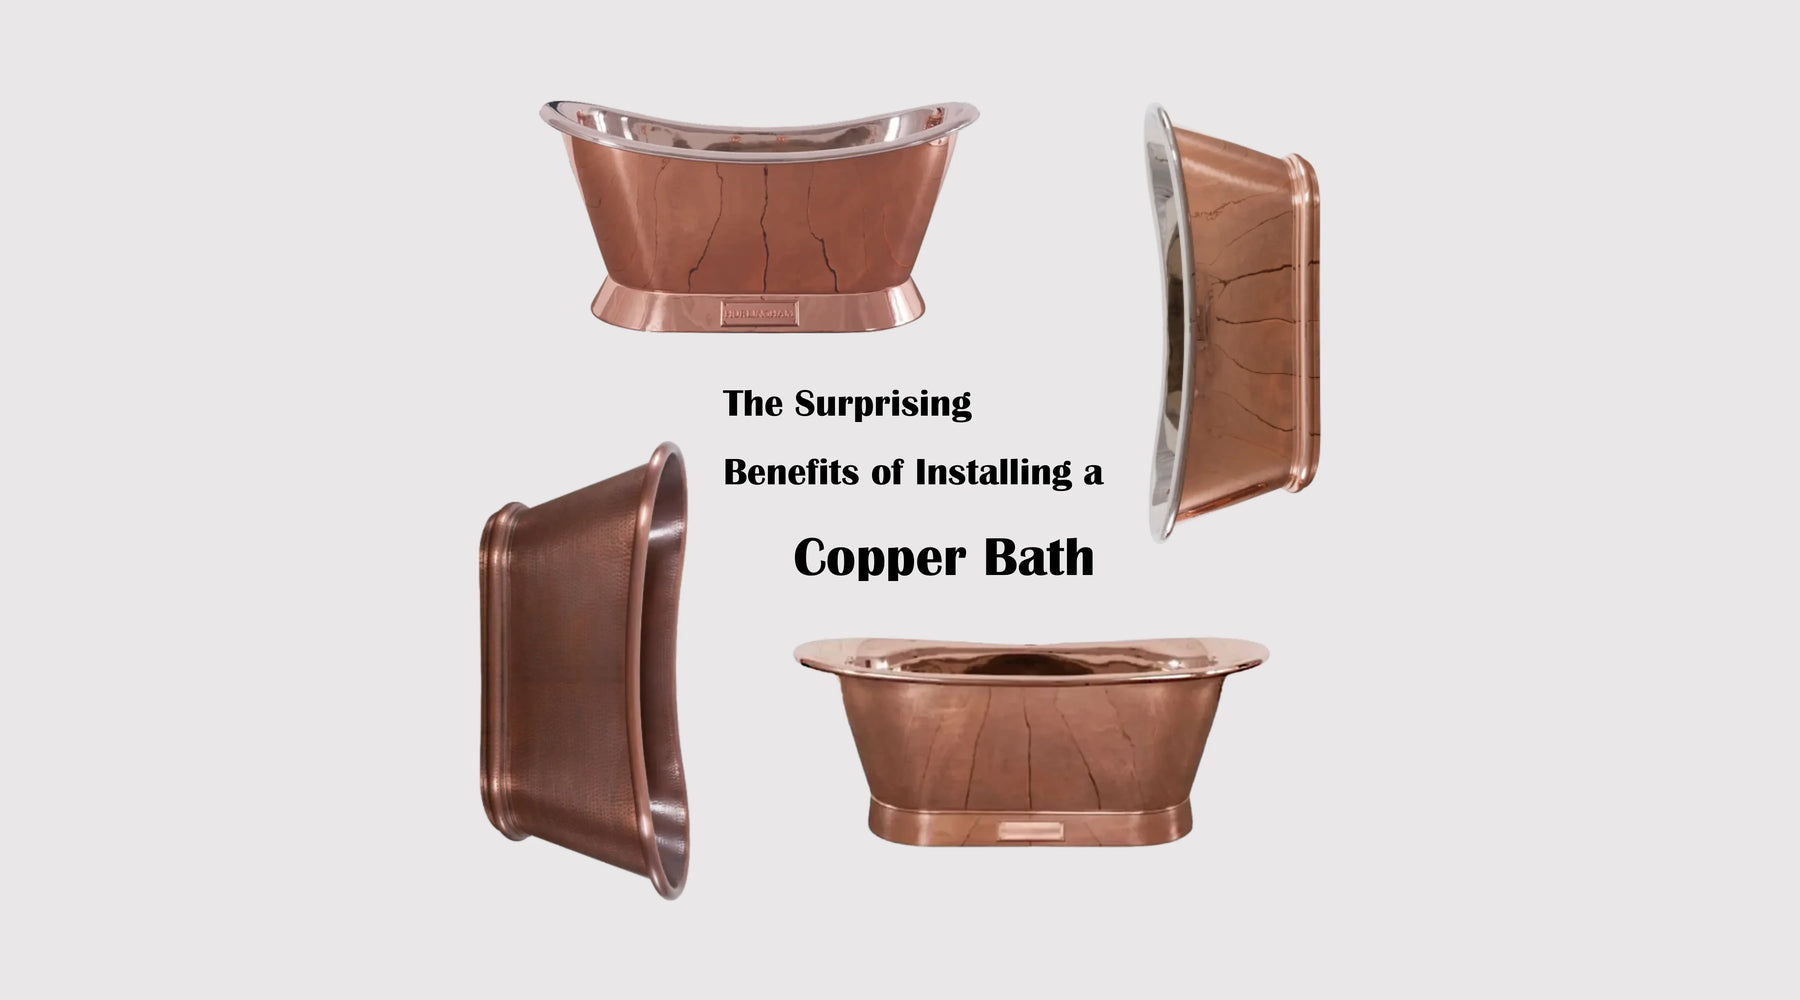 The Surprising Benefits of Installing a Copper Bath